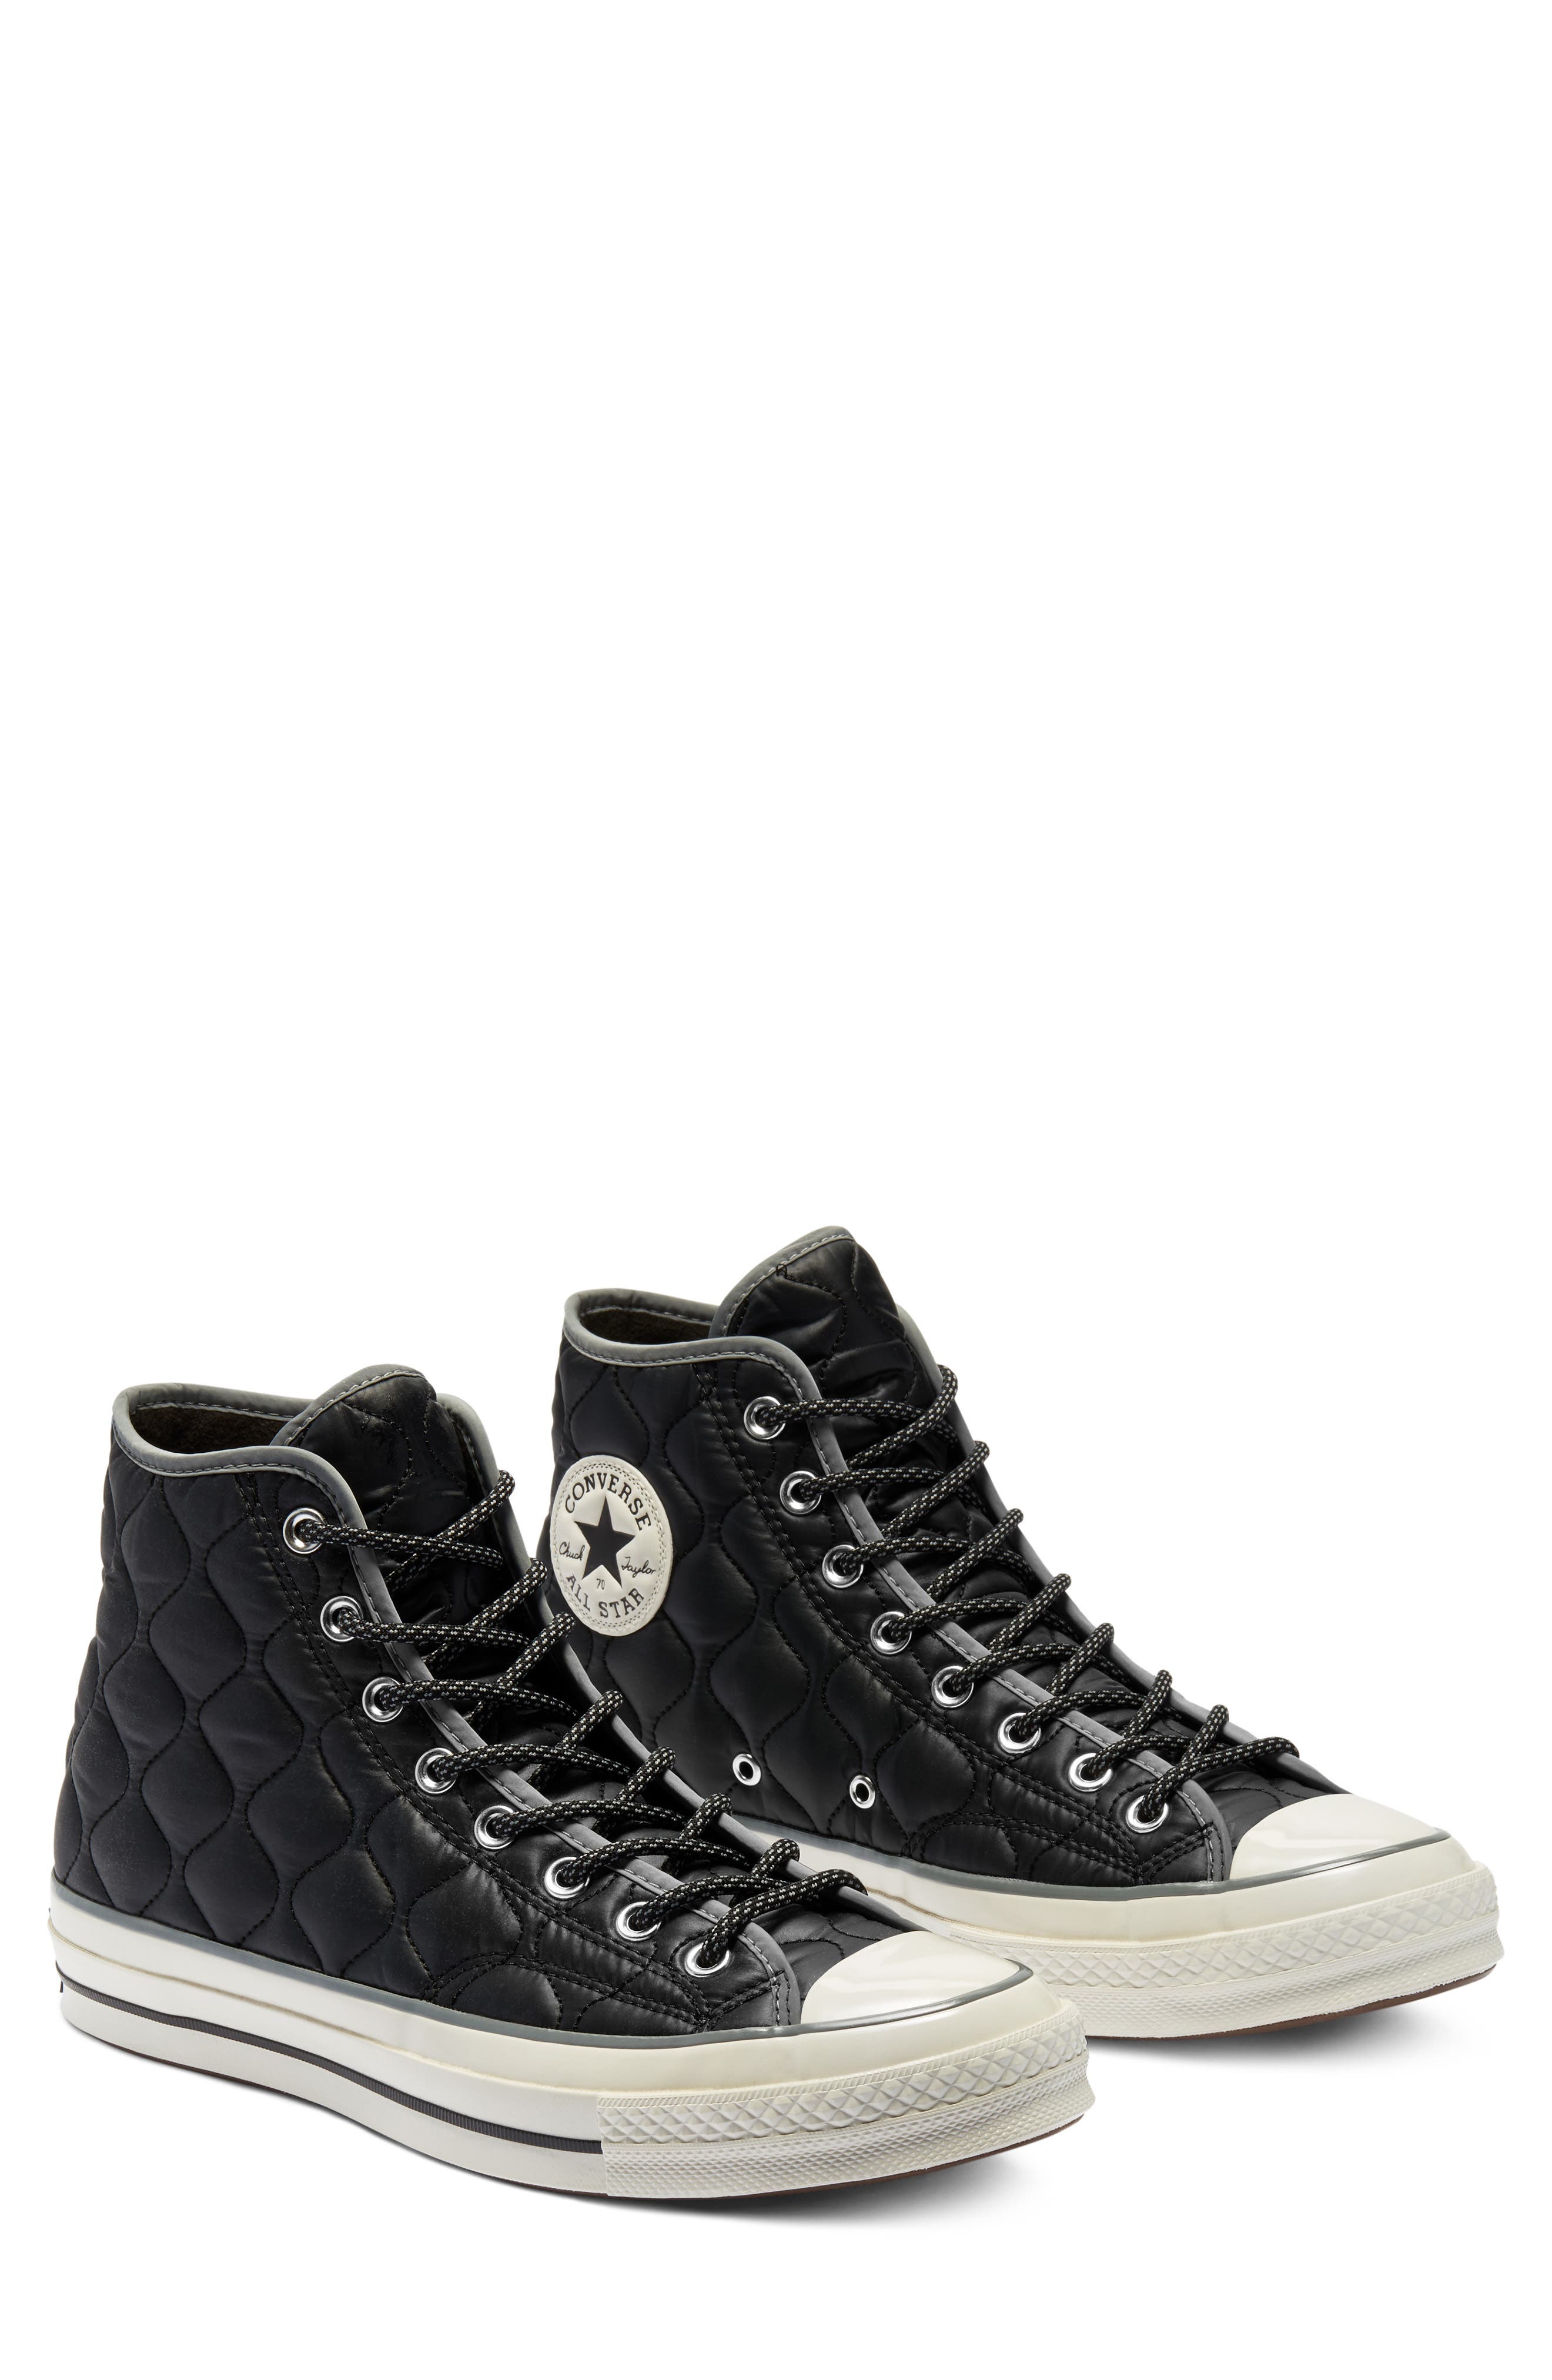 black converse with spikes